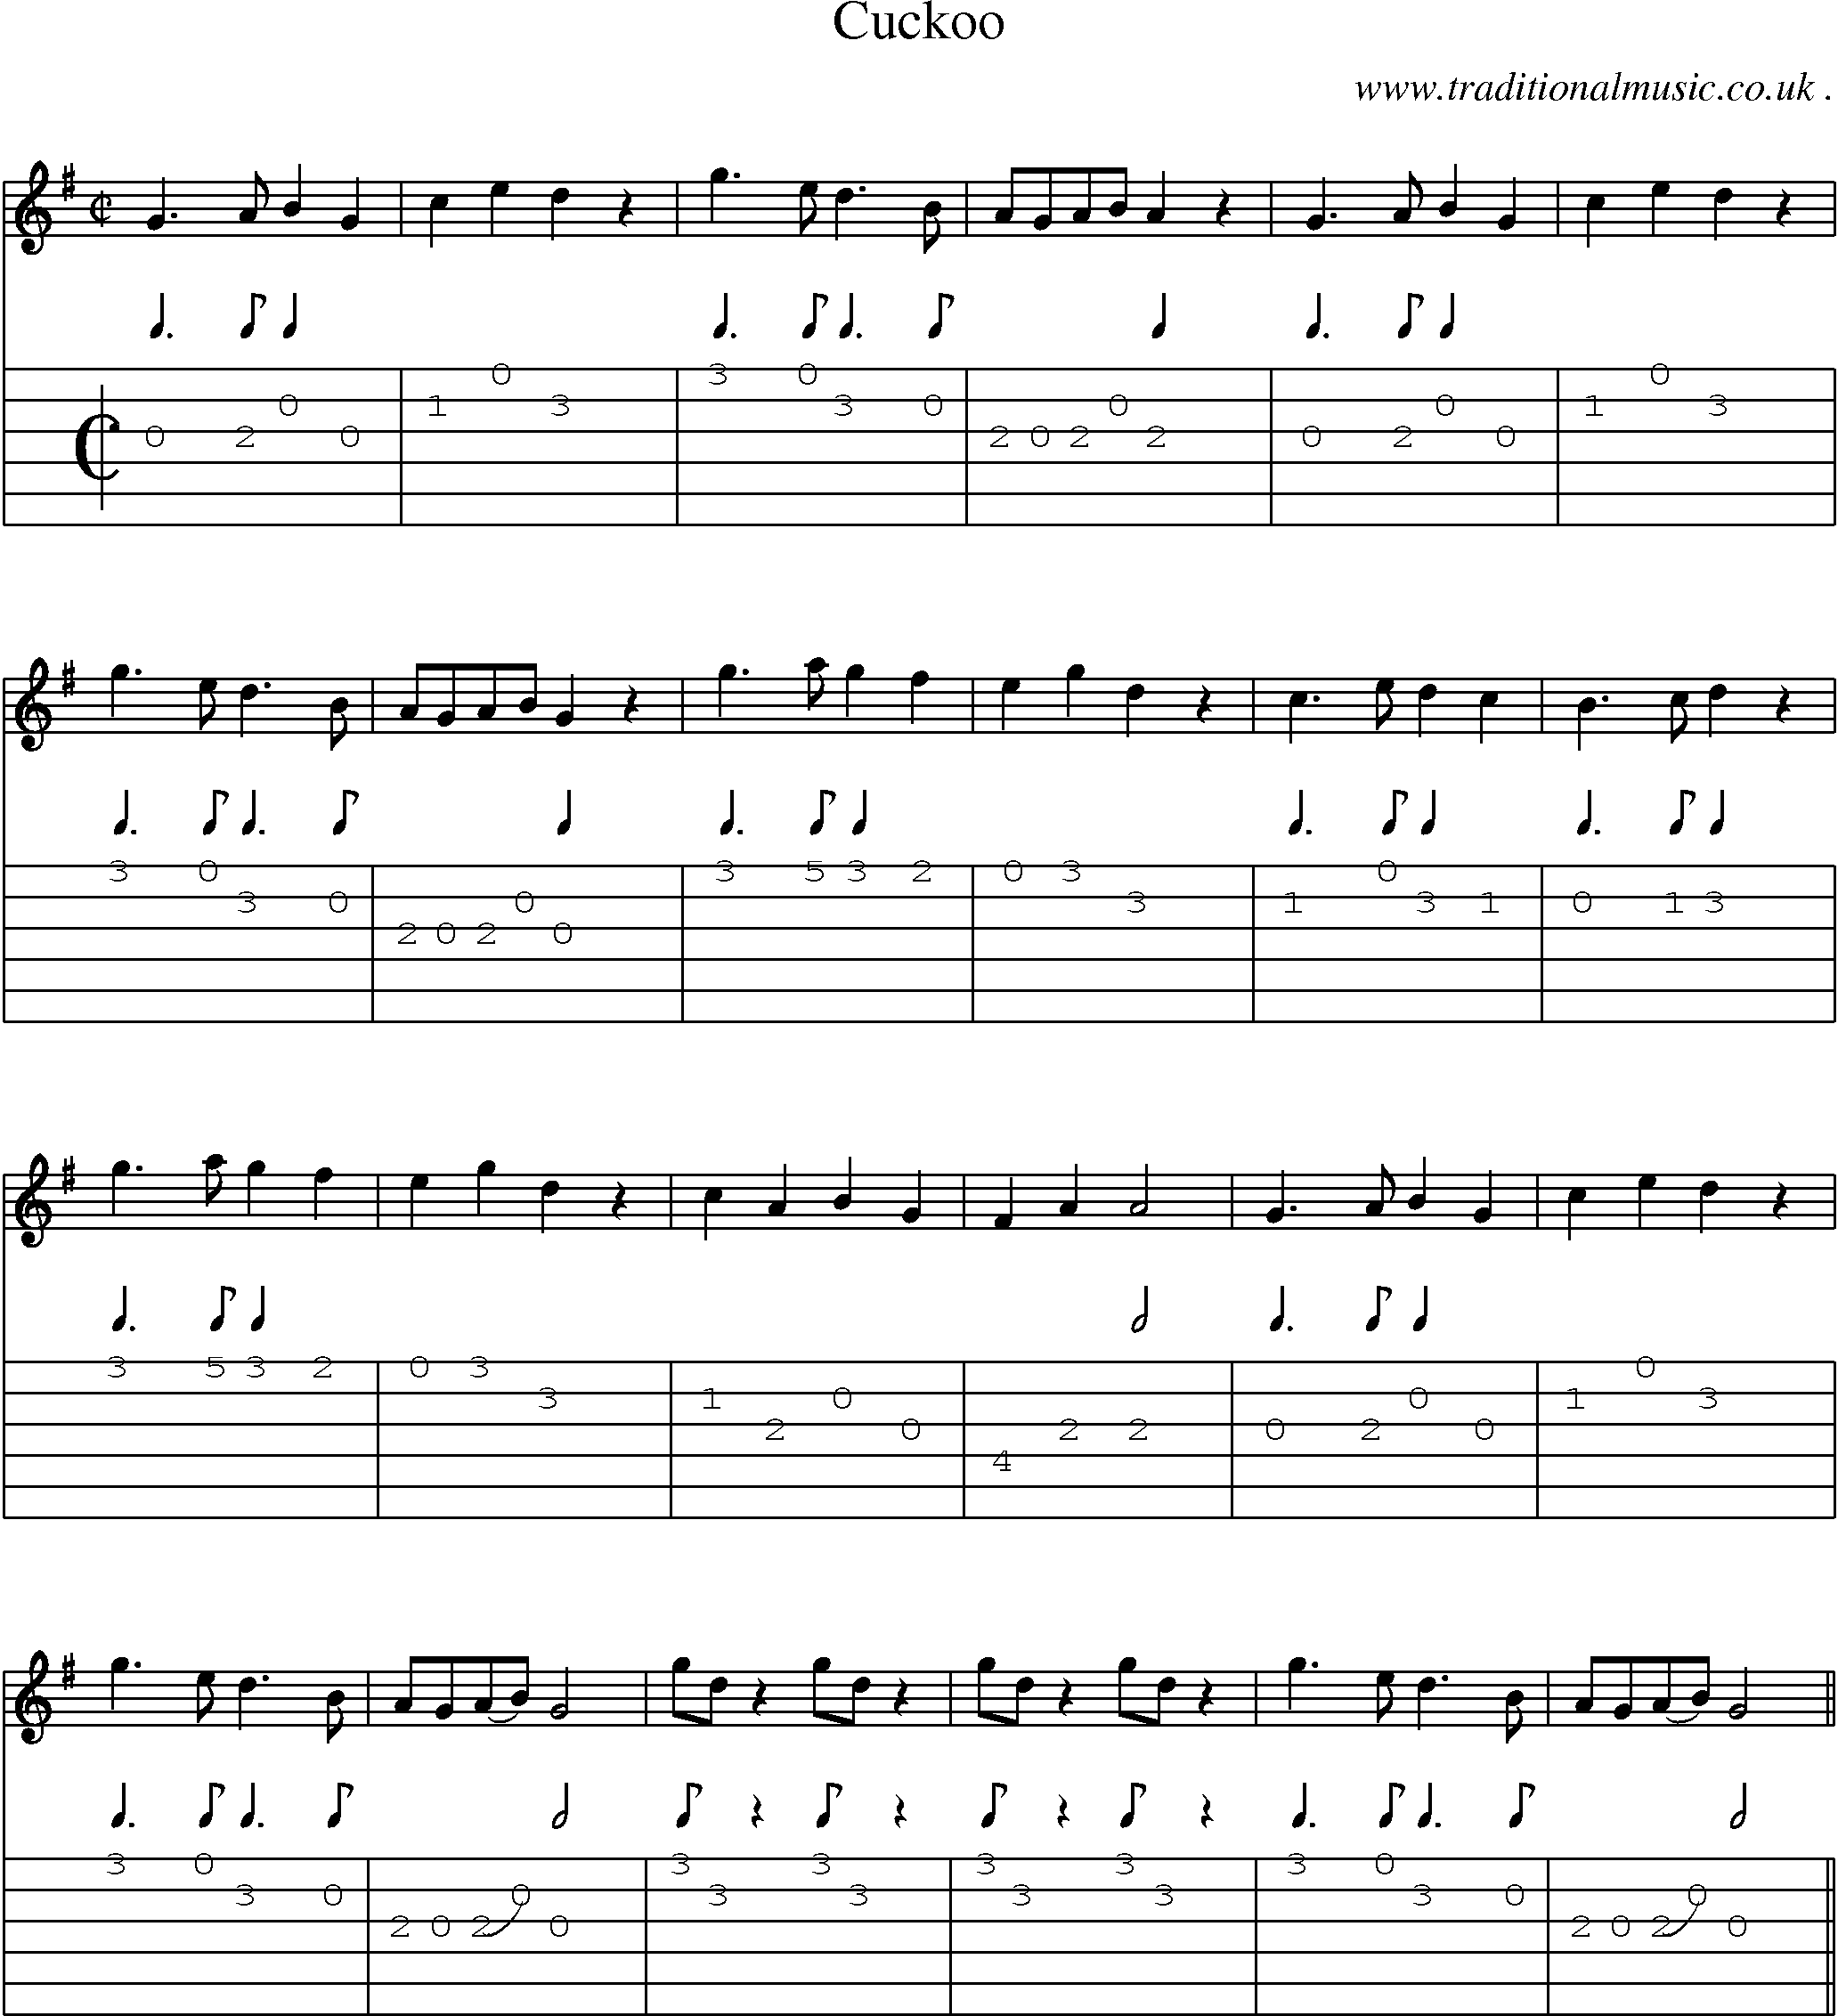 Sheet-Music and Guitar Tabs for Cuckoo